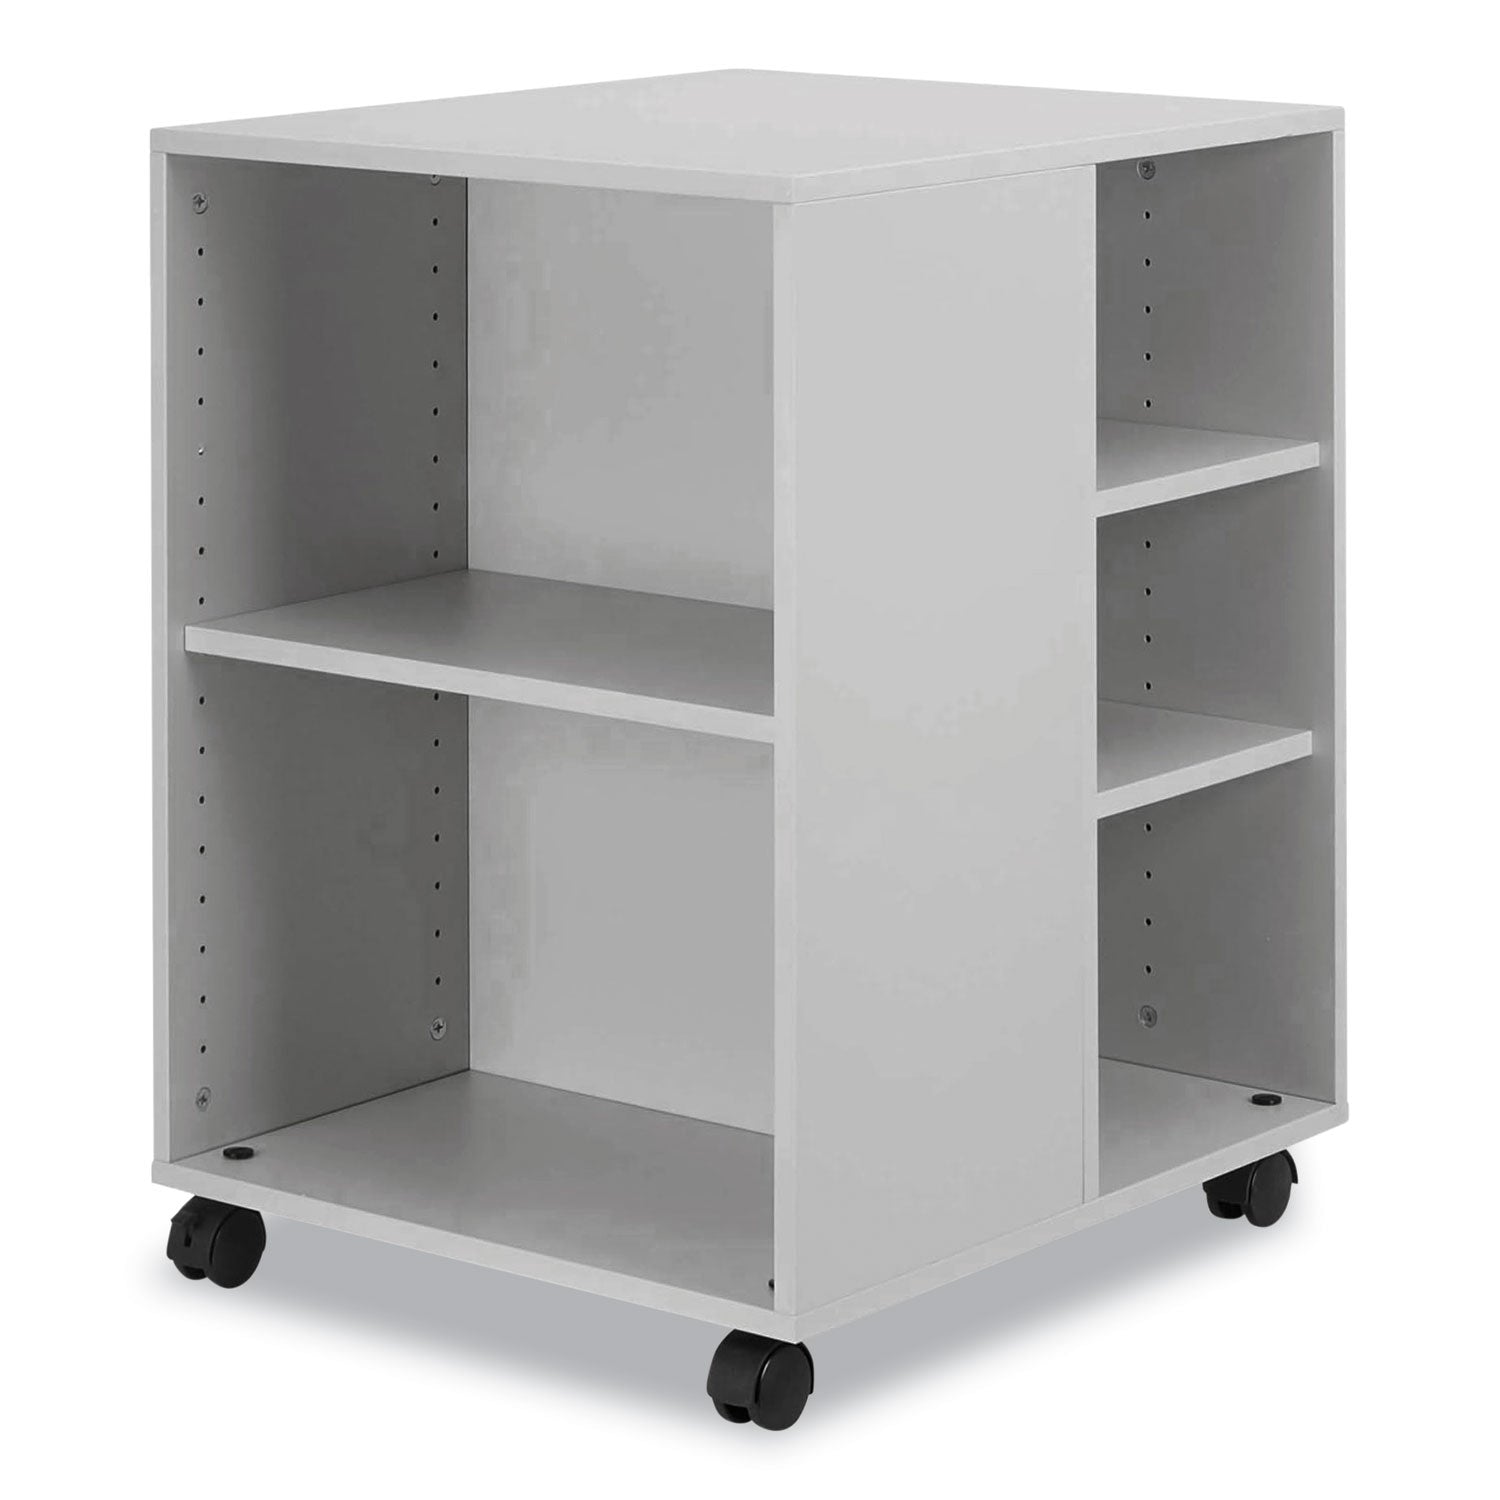 flexible-multi-functional-cart-for-office-storage-wood-6-shelves-2079-x-2331-x-2945-gray_dbl311310 - 1